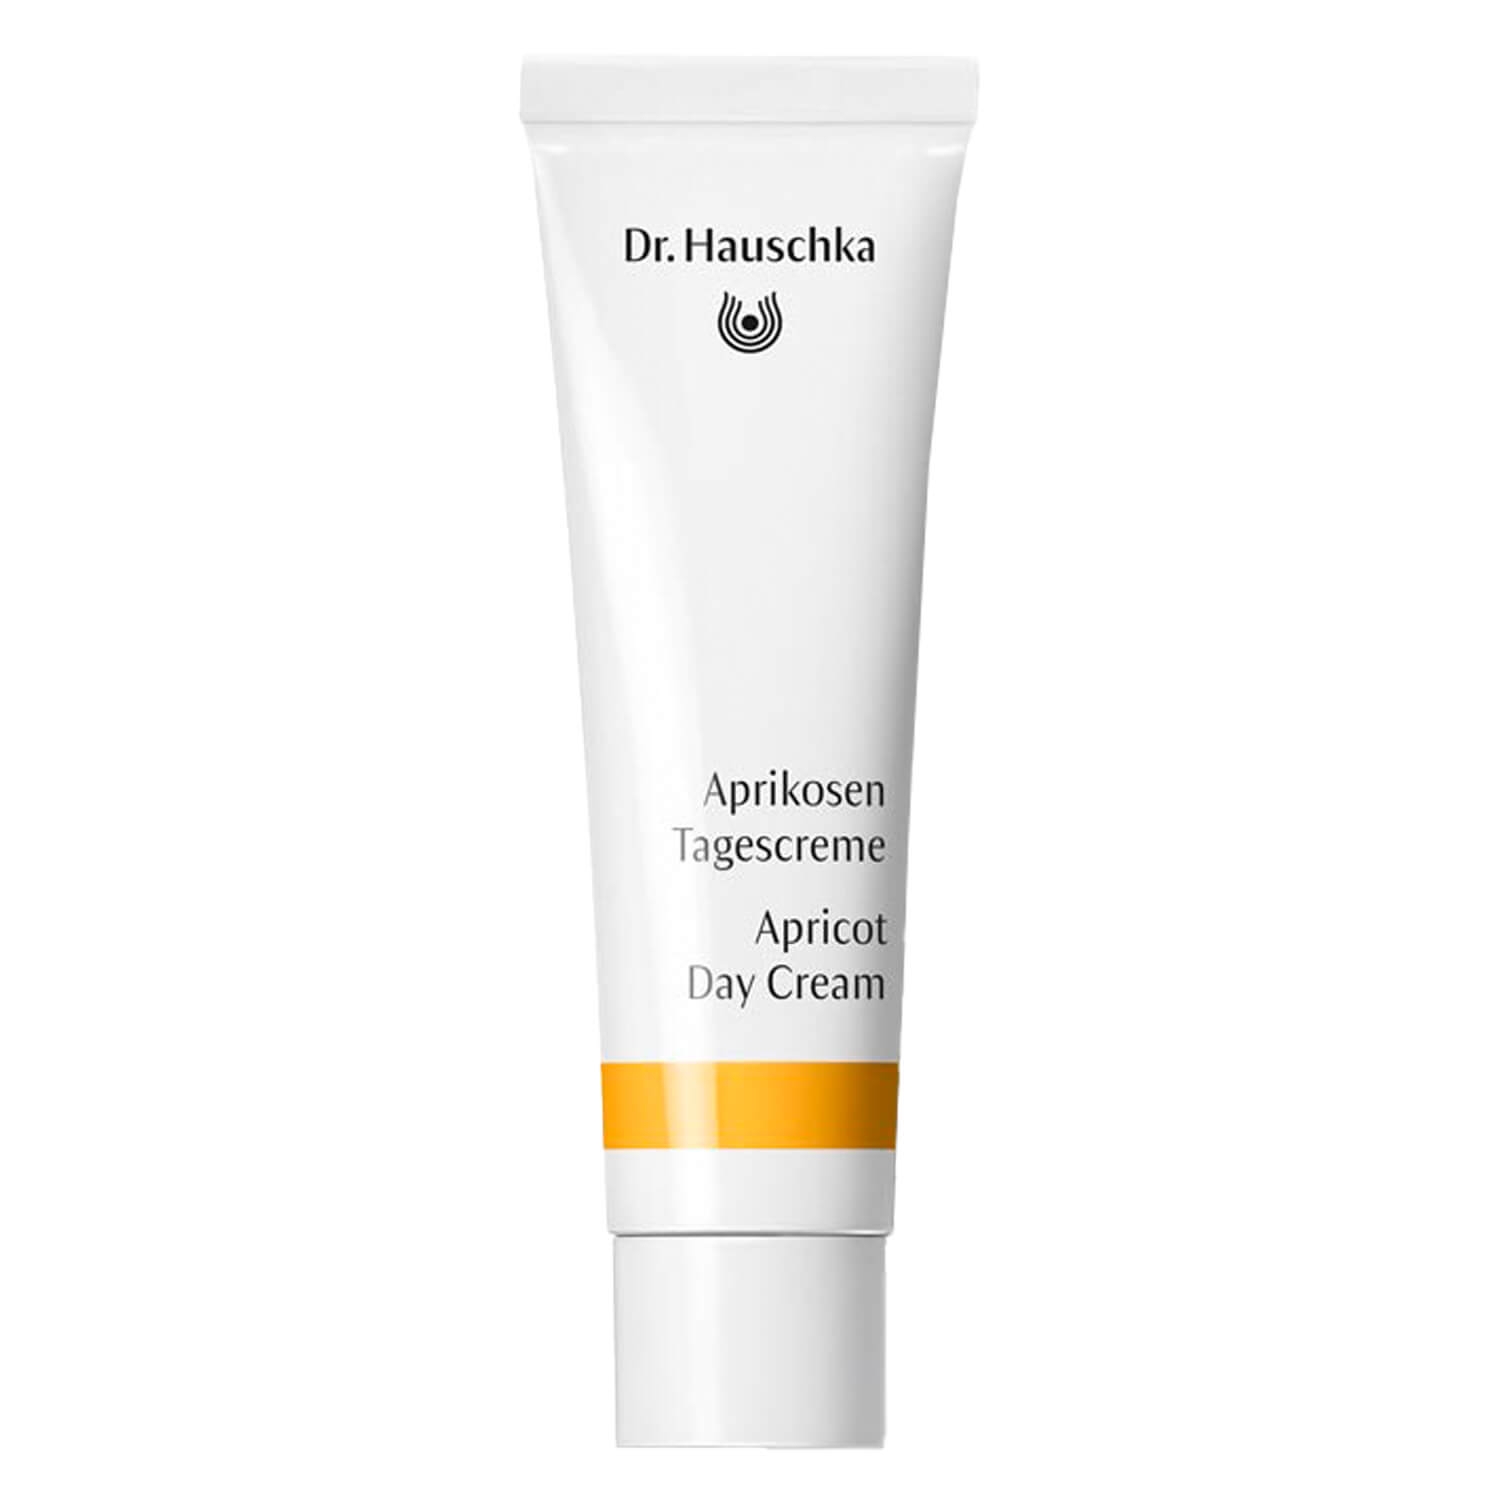 Product image from Dr. Hauschka - Aprikosen Tagescreme